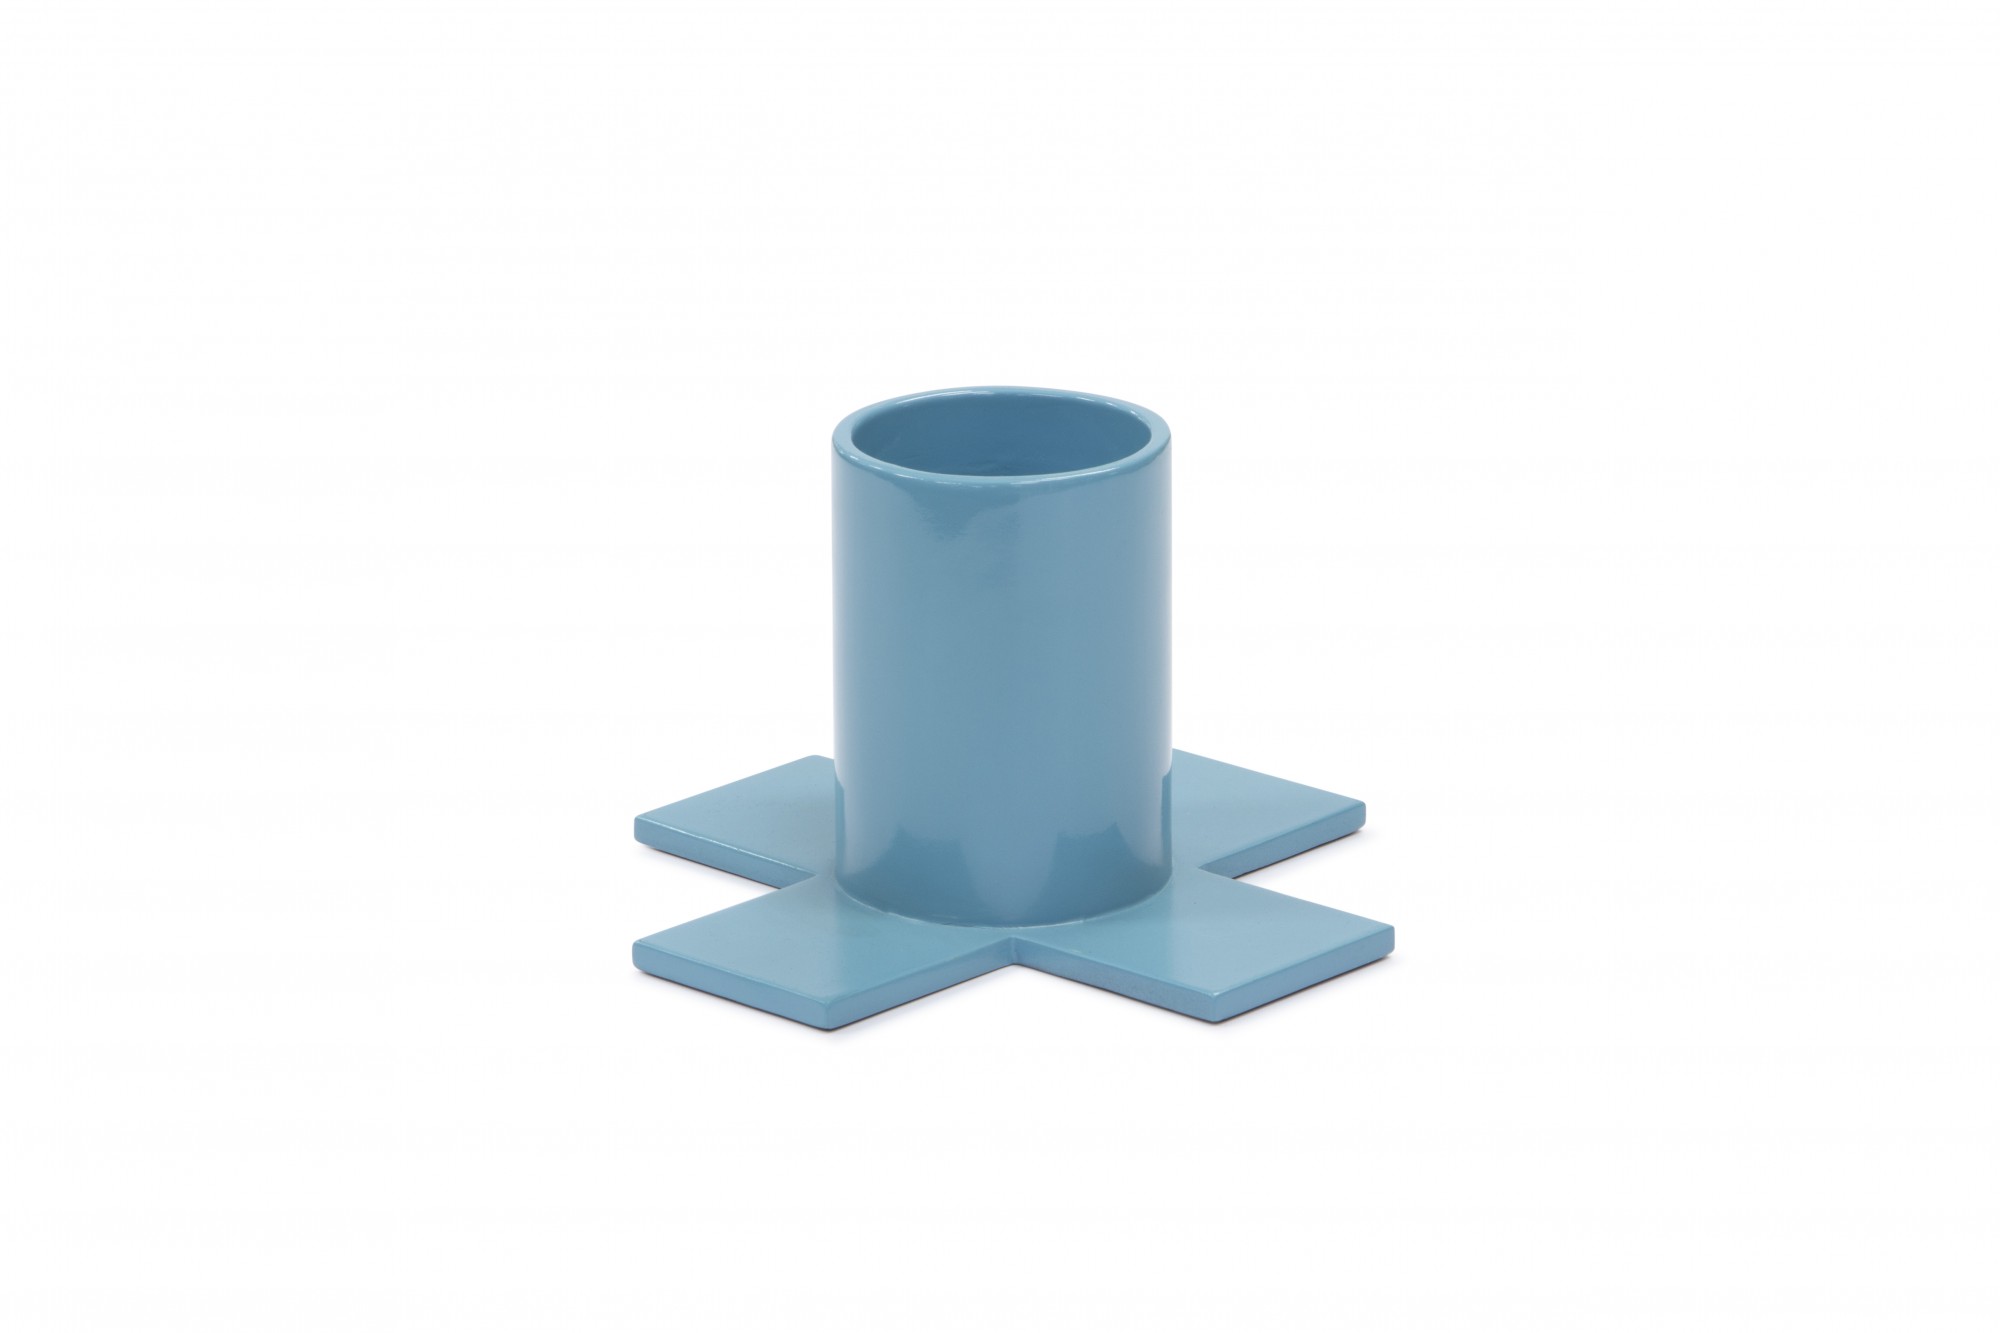 GLOSSY LACQUER CANDLE HOLDER - CDDL3687